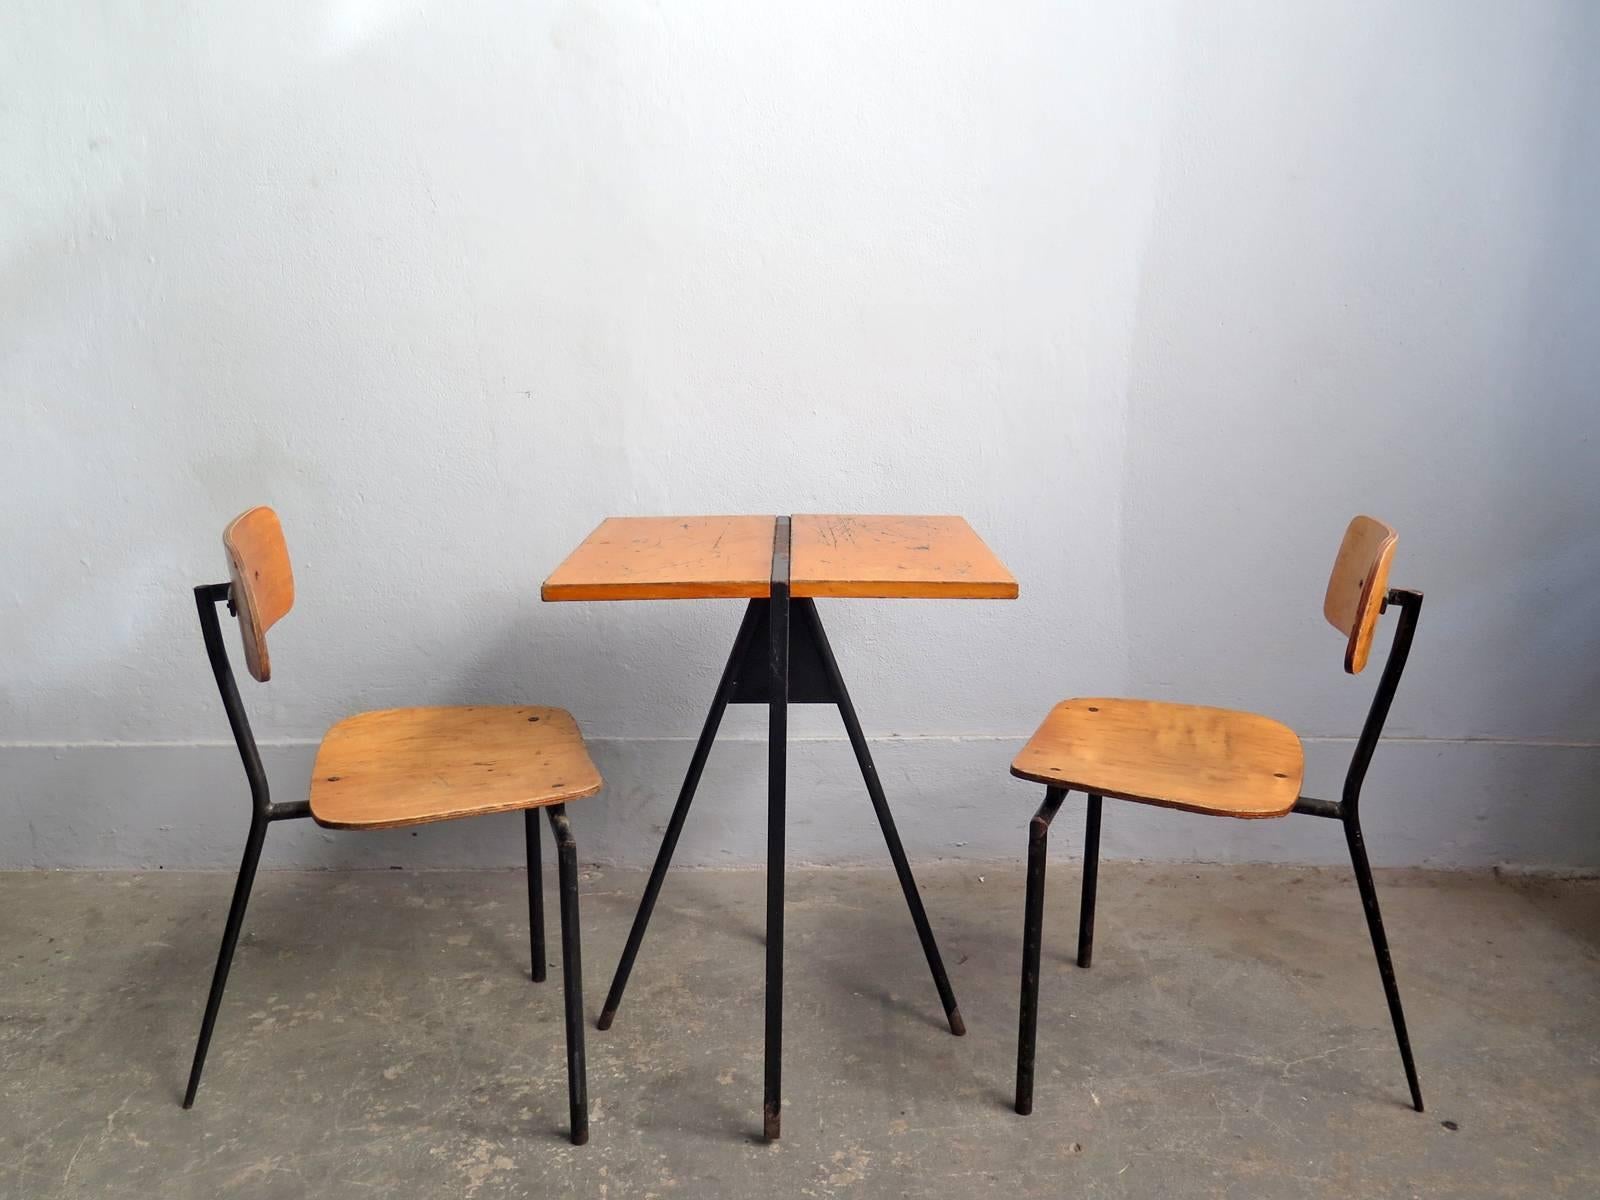 Set of two three-leg chairs and bistro table from with black painted metal frames and wooden parts.